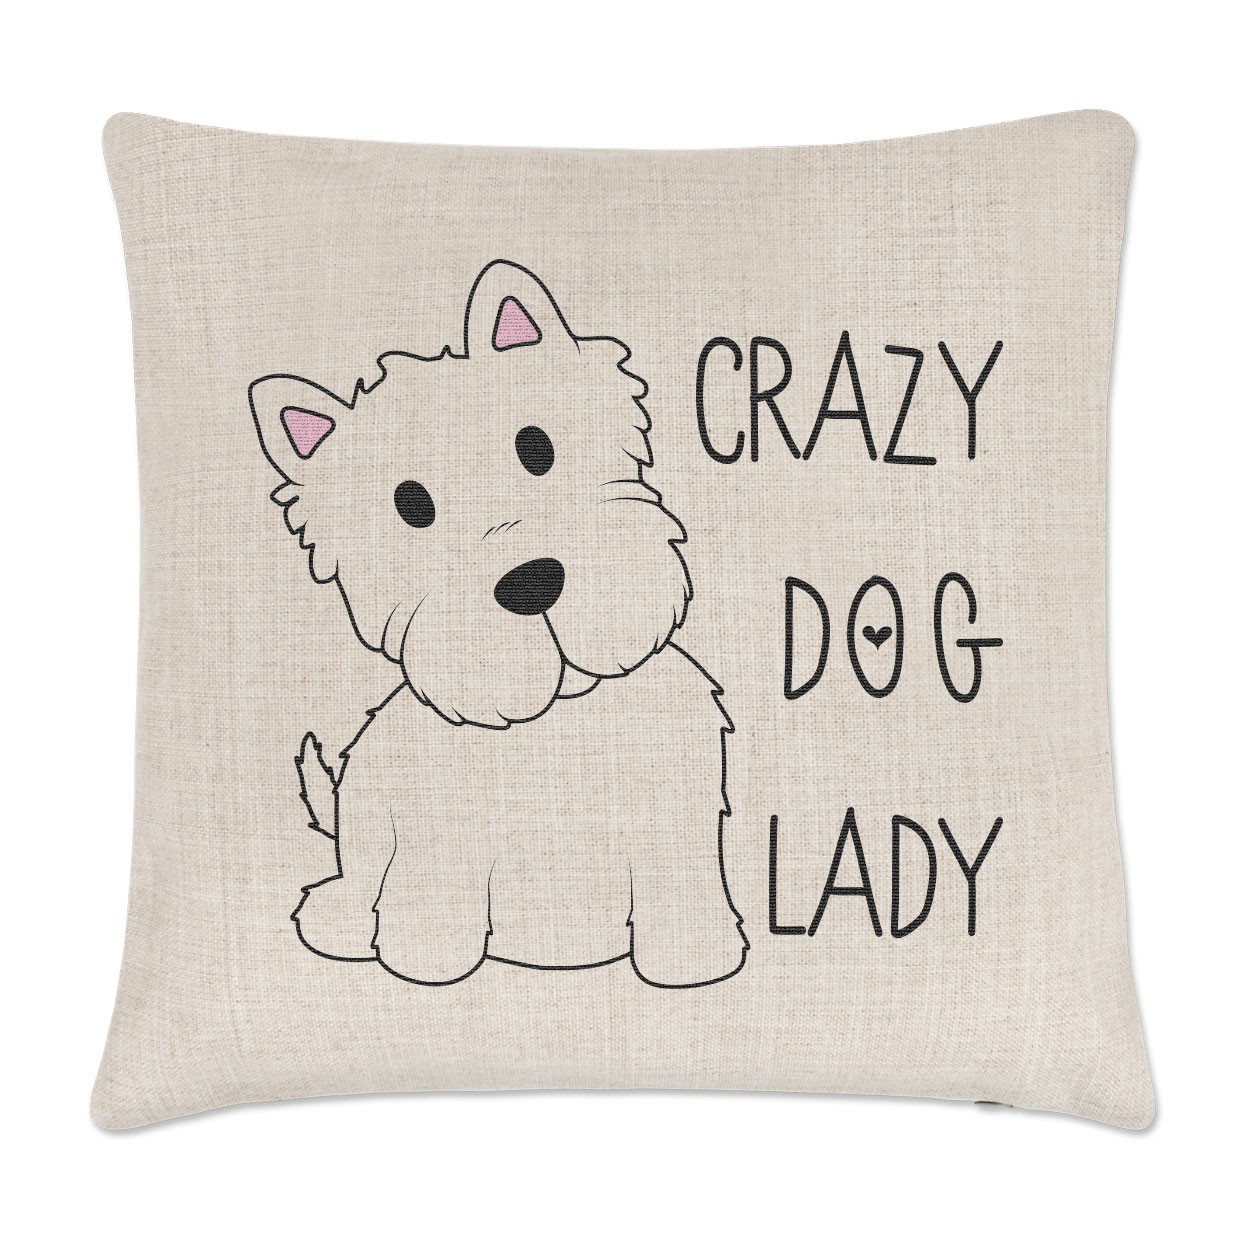 Crazy Dog Lady Linen Cushion Cover